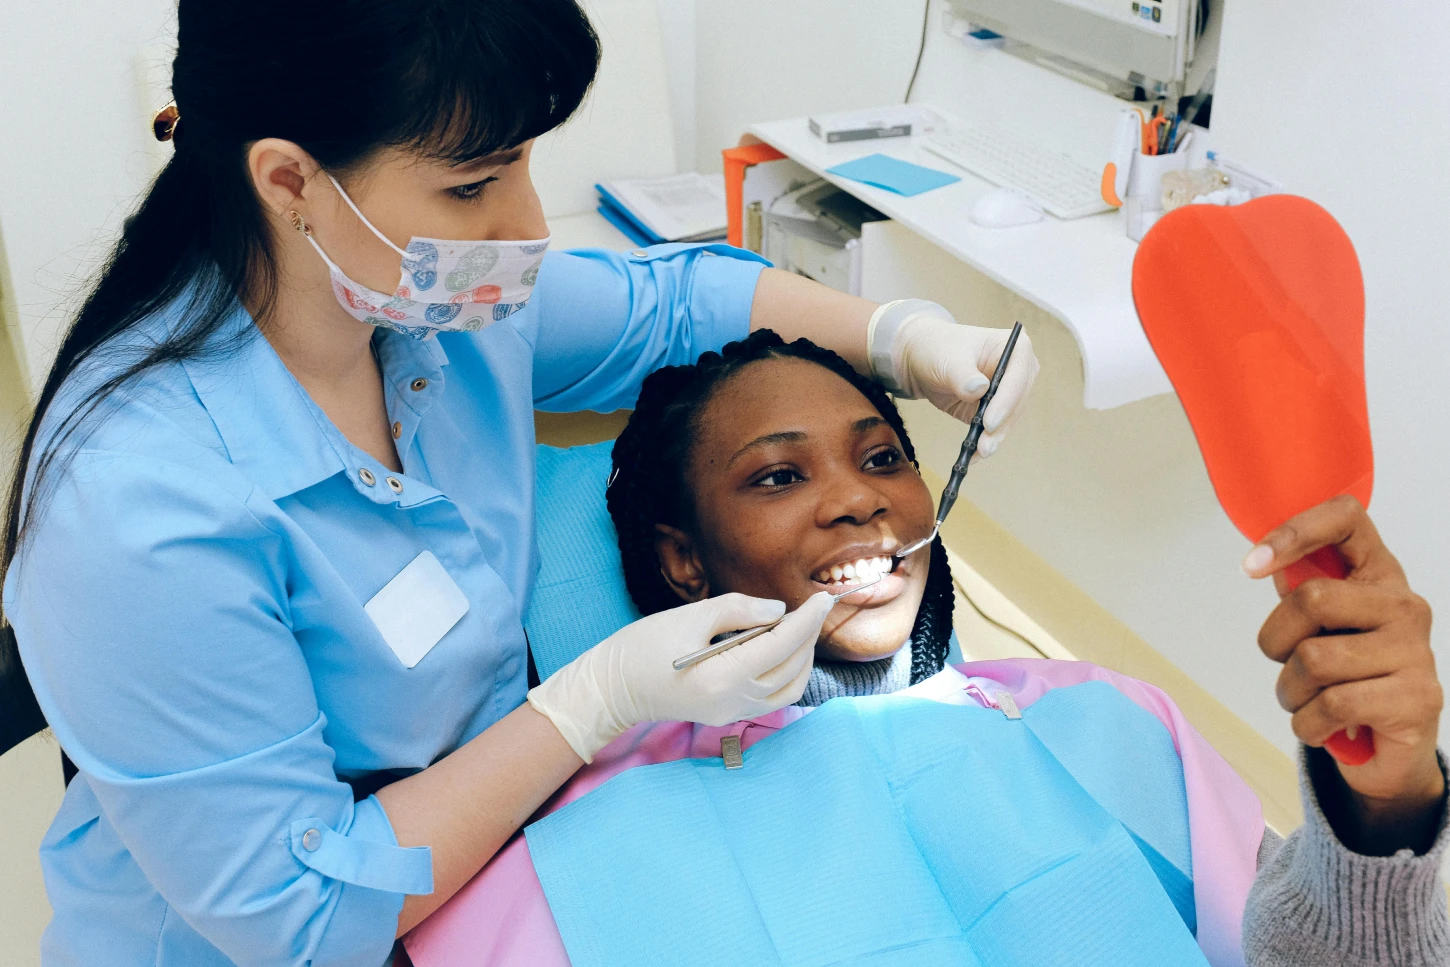 Hygienist performing checkup on patient.